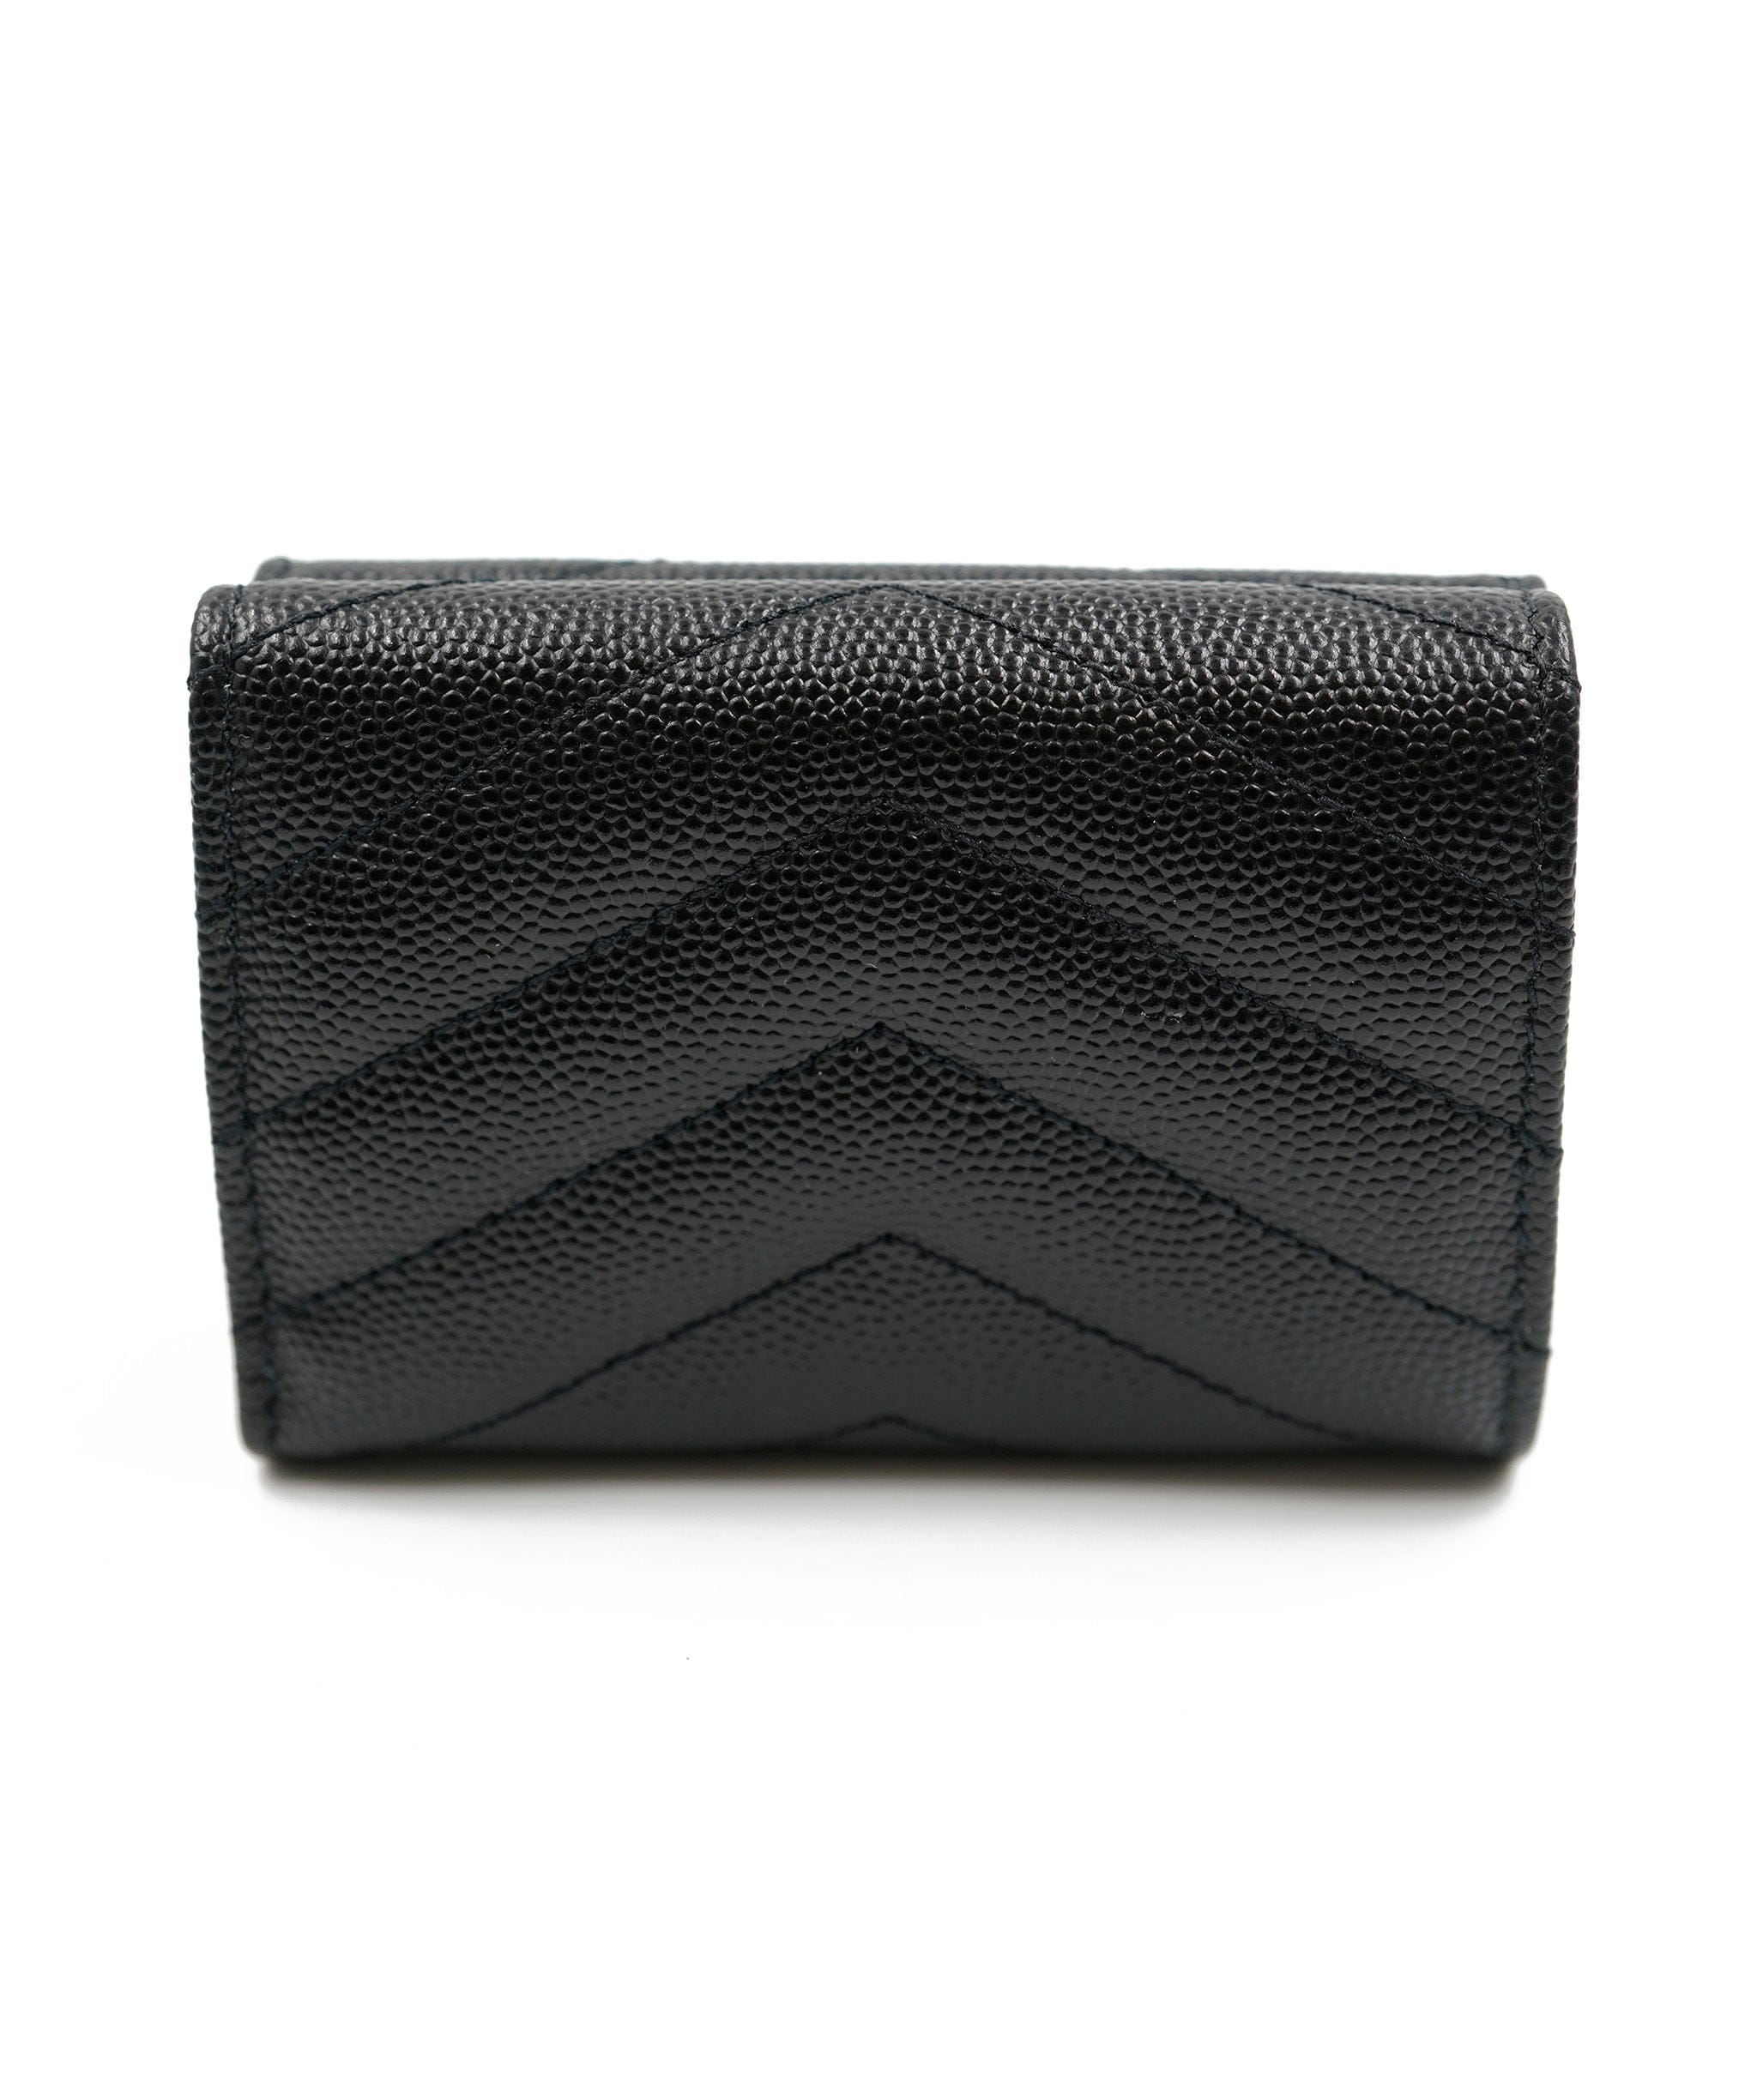 Yves Saint Laurent YSL grained leather black small compact wallet with gold hardware ASL5462